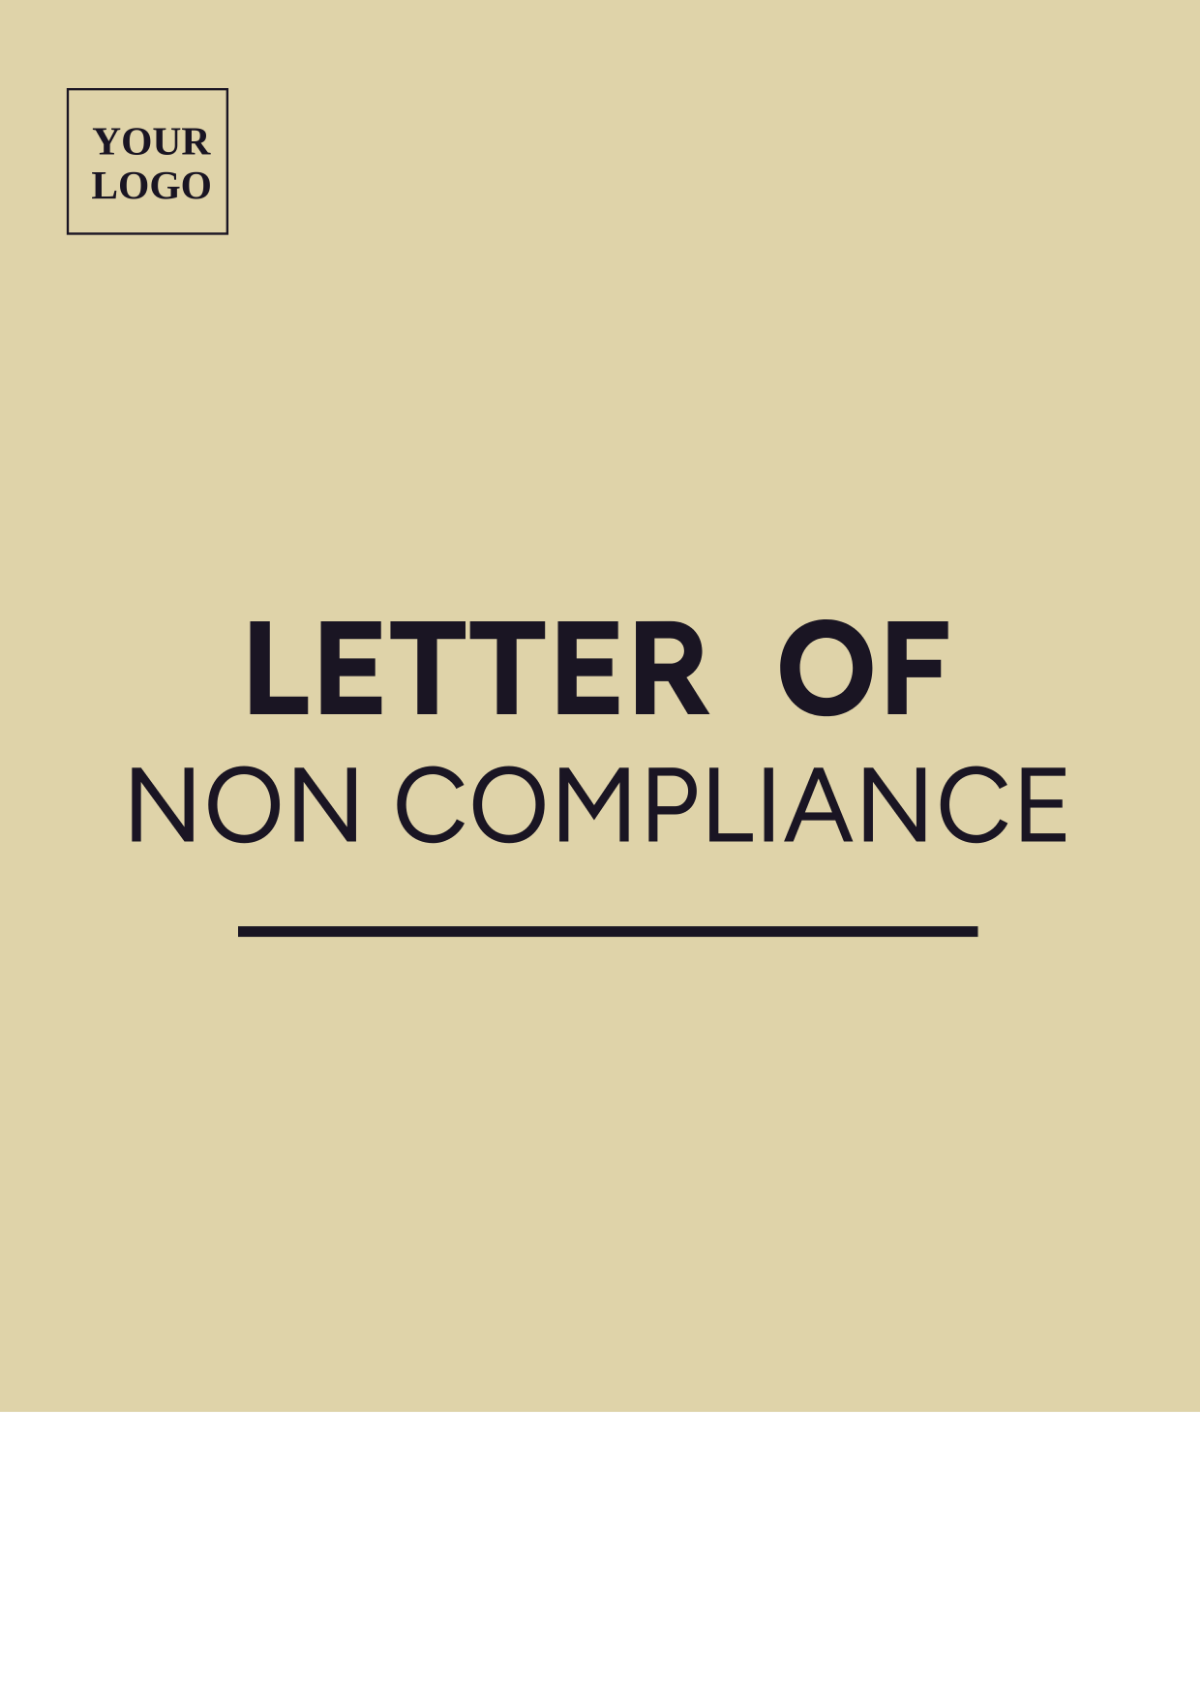 Letter Of Non Compliance Template